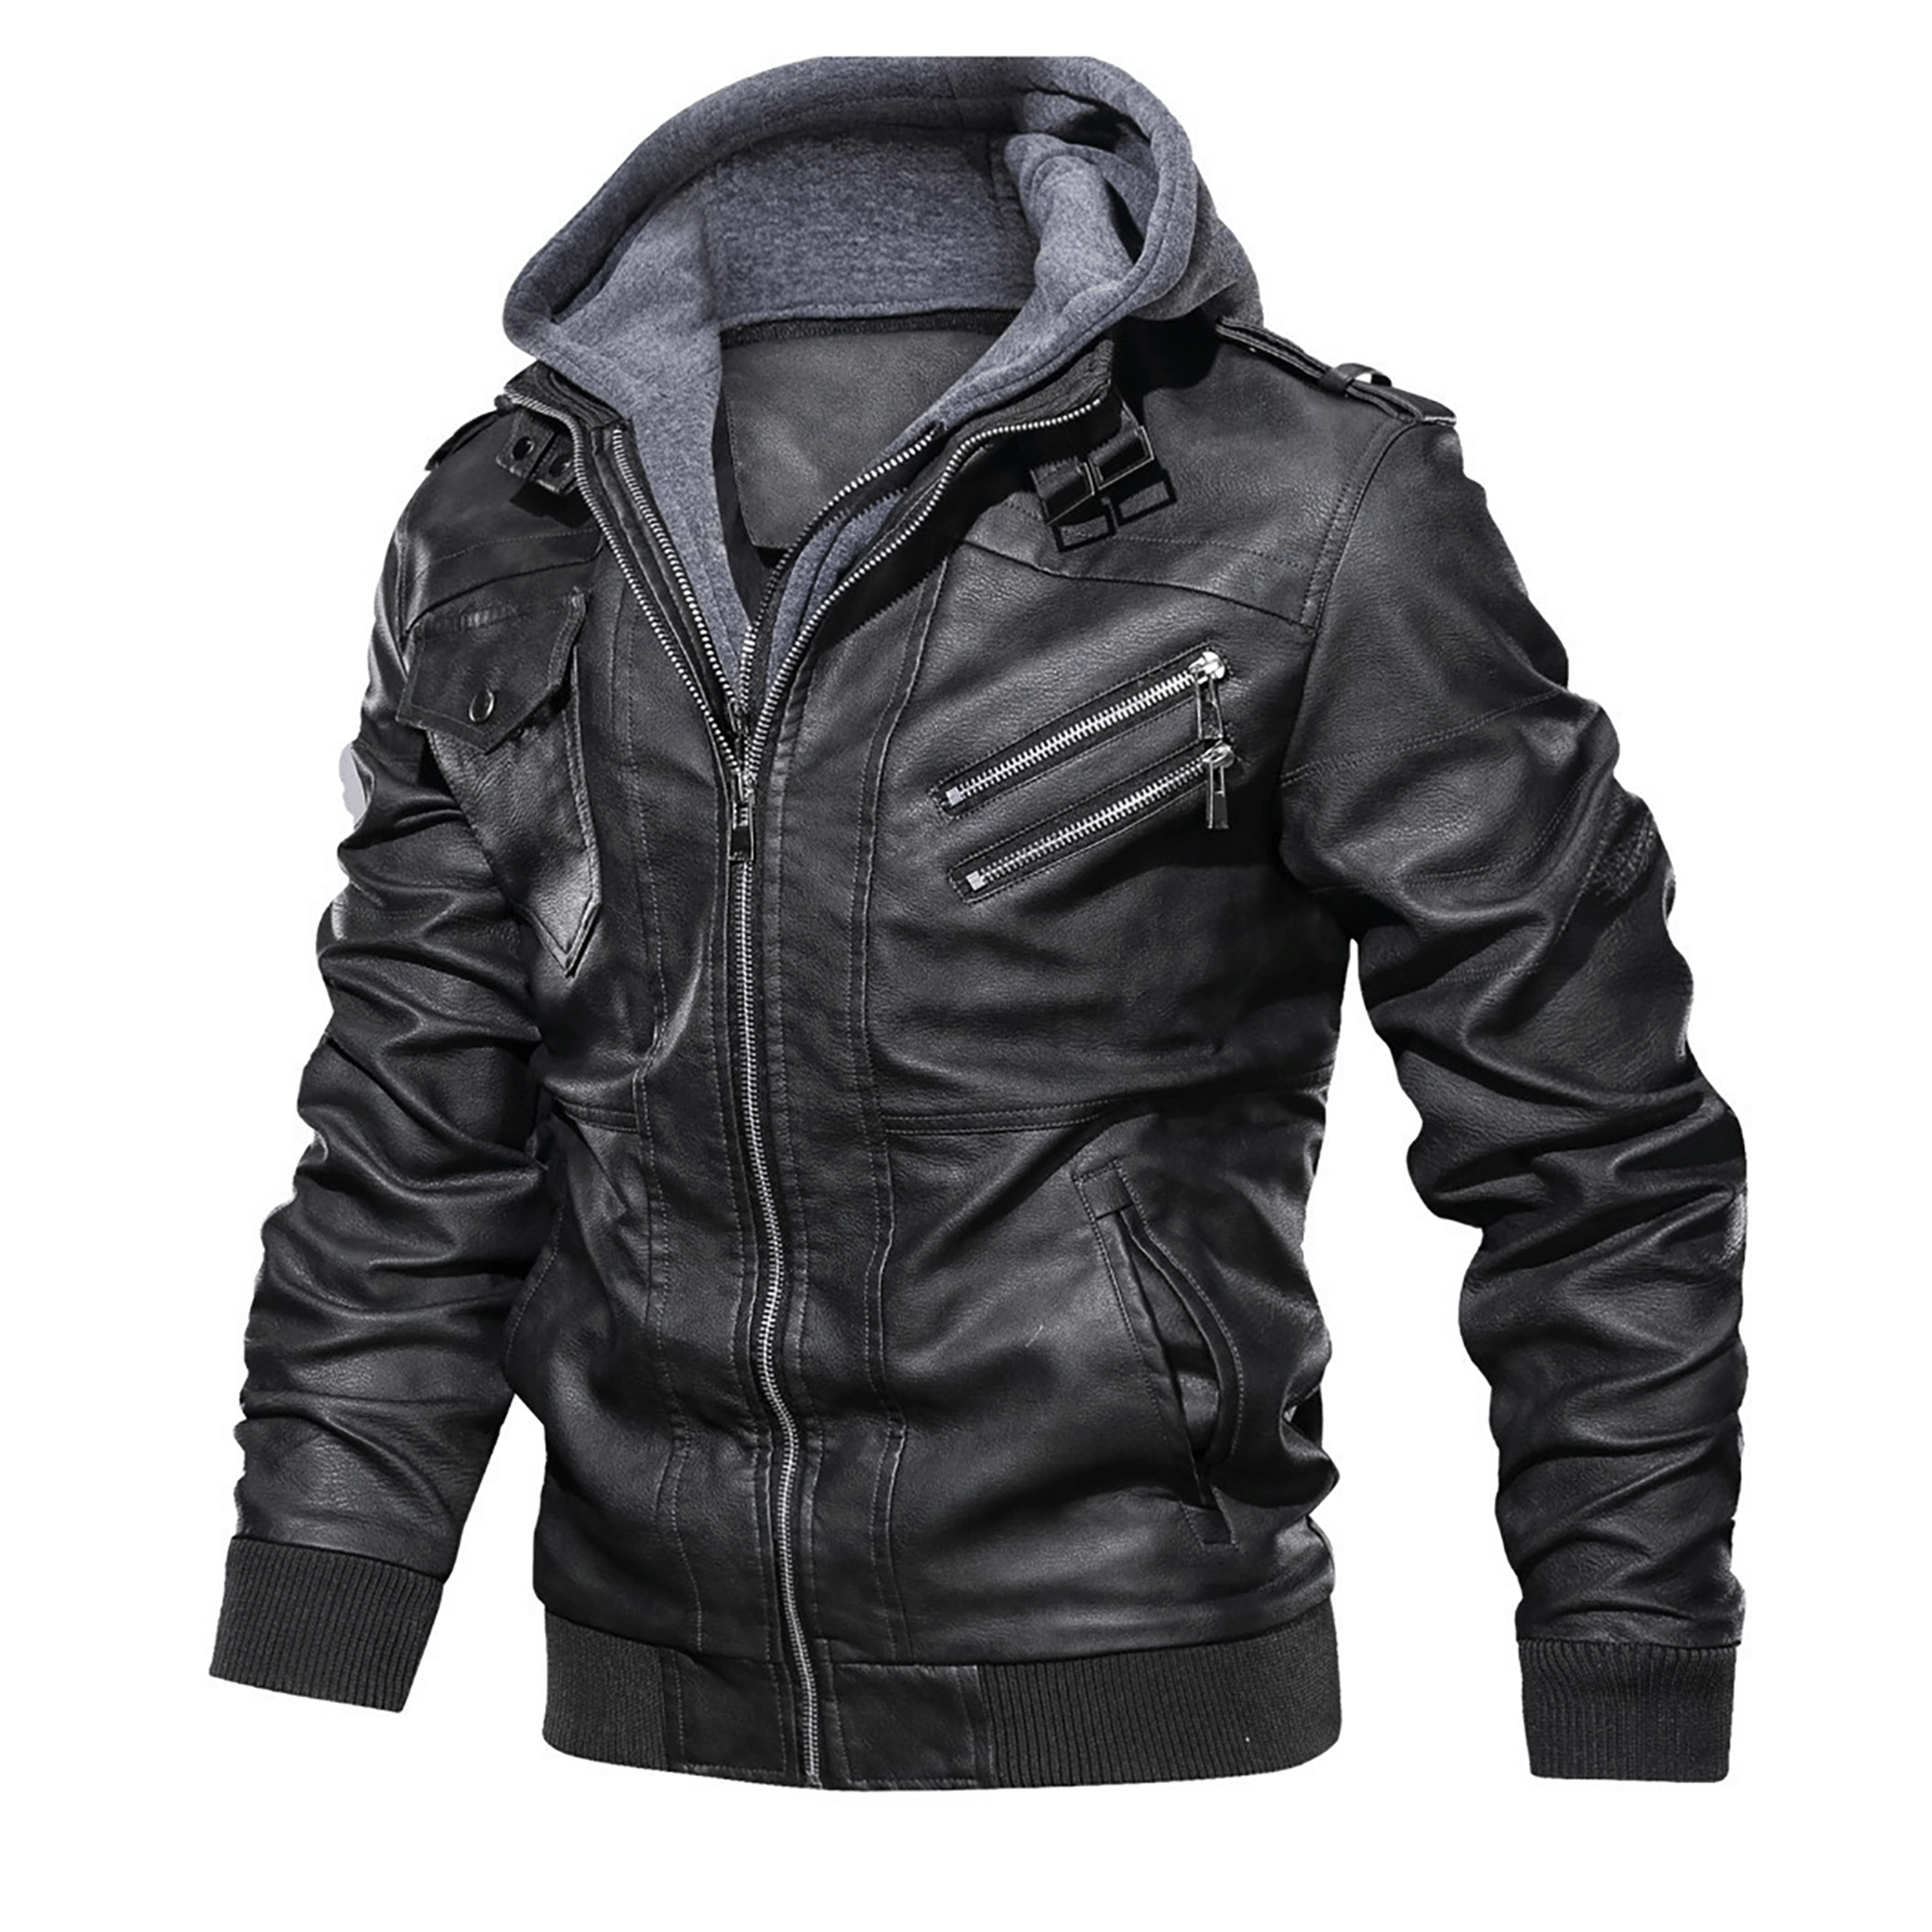 Top leather jackets and latest products 377